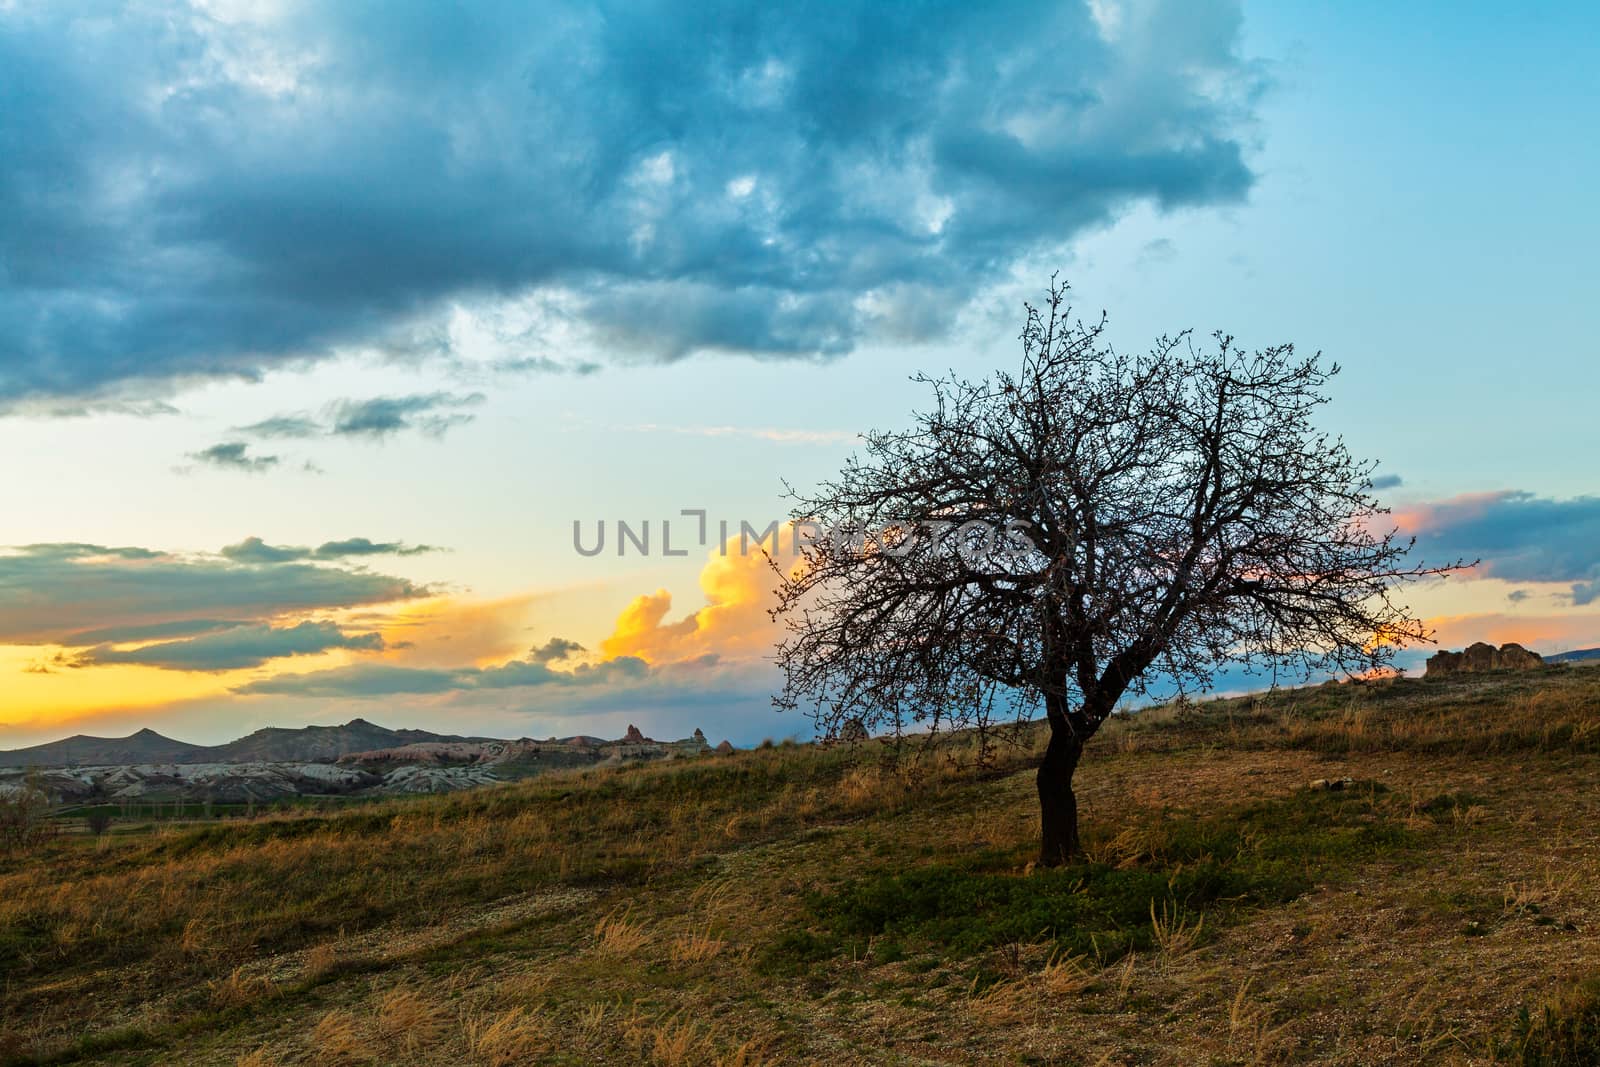 Sunset and lonley tree in the field by igor_stramyk